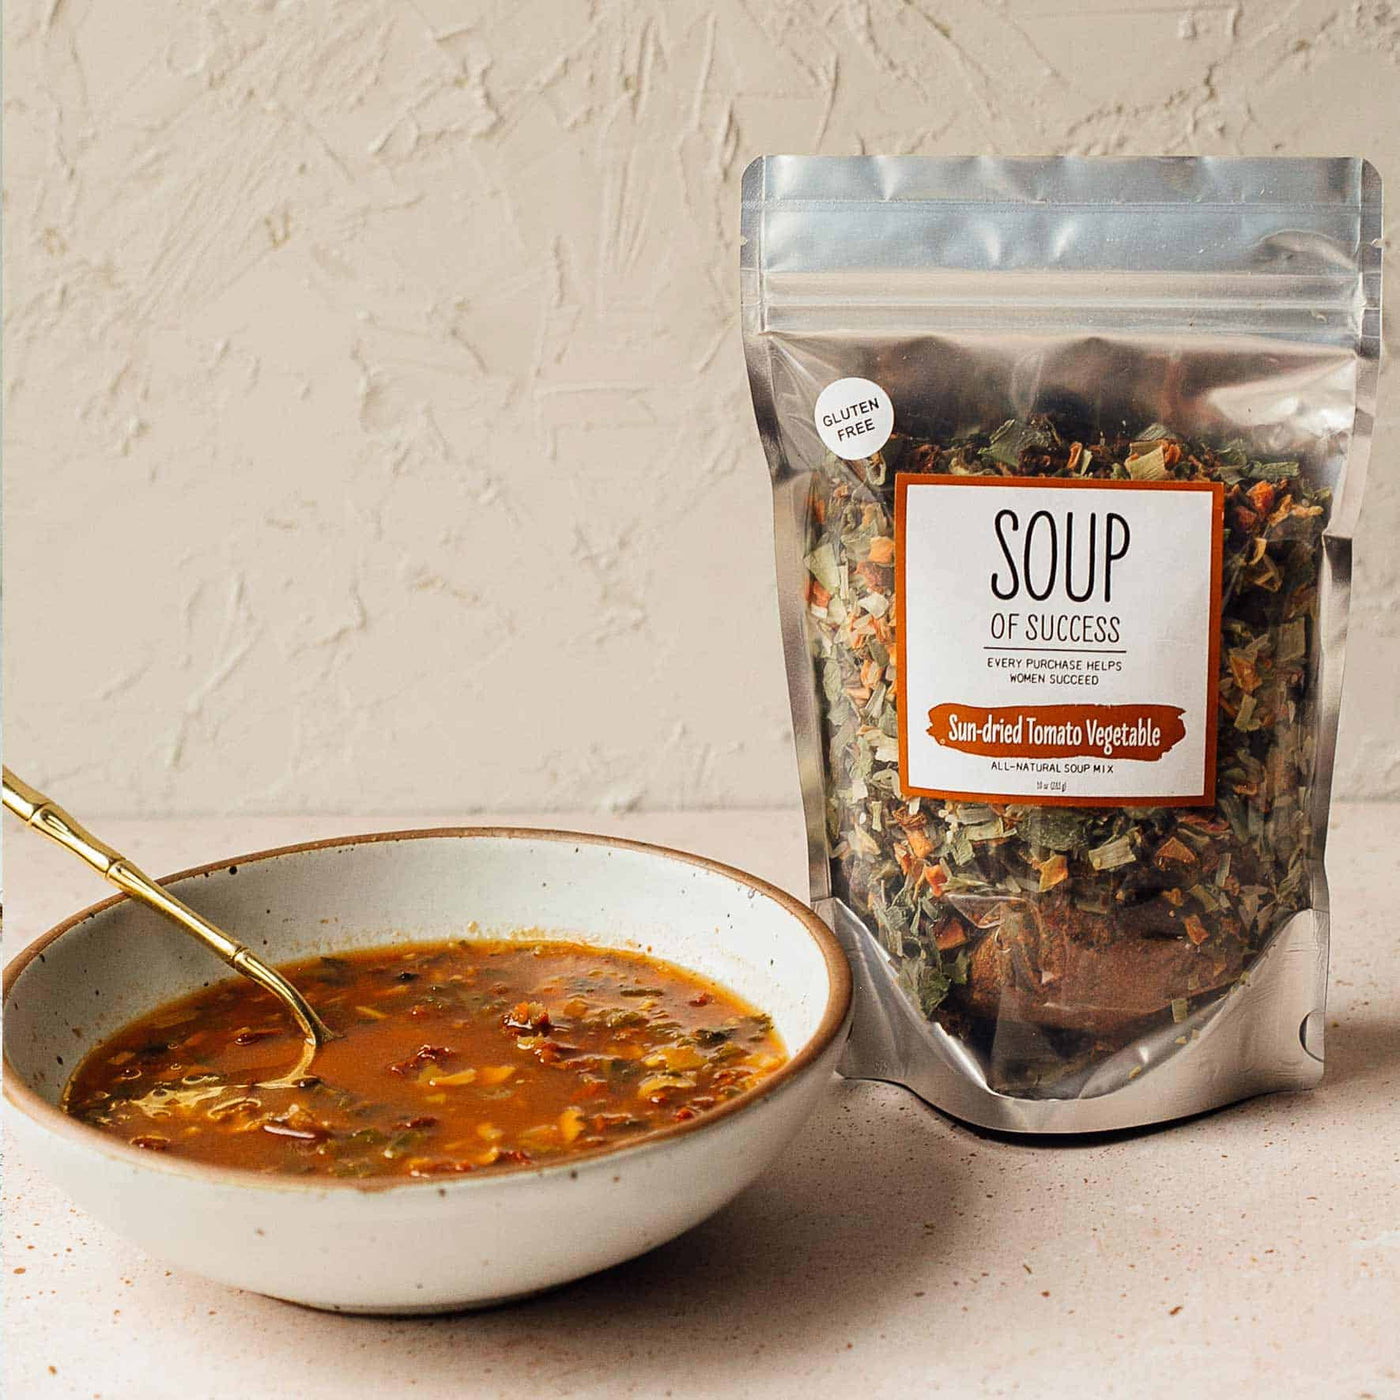 Soup of Success- Sun-dried Tomato Vegetable